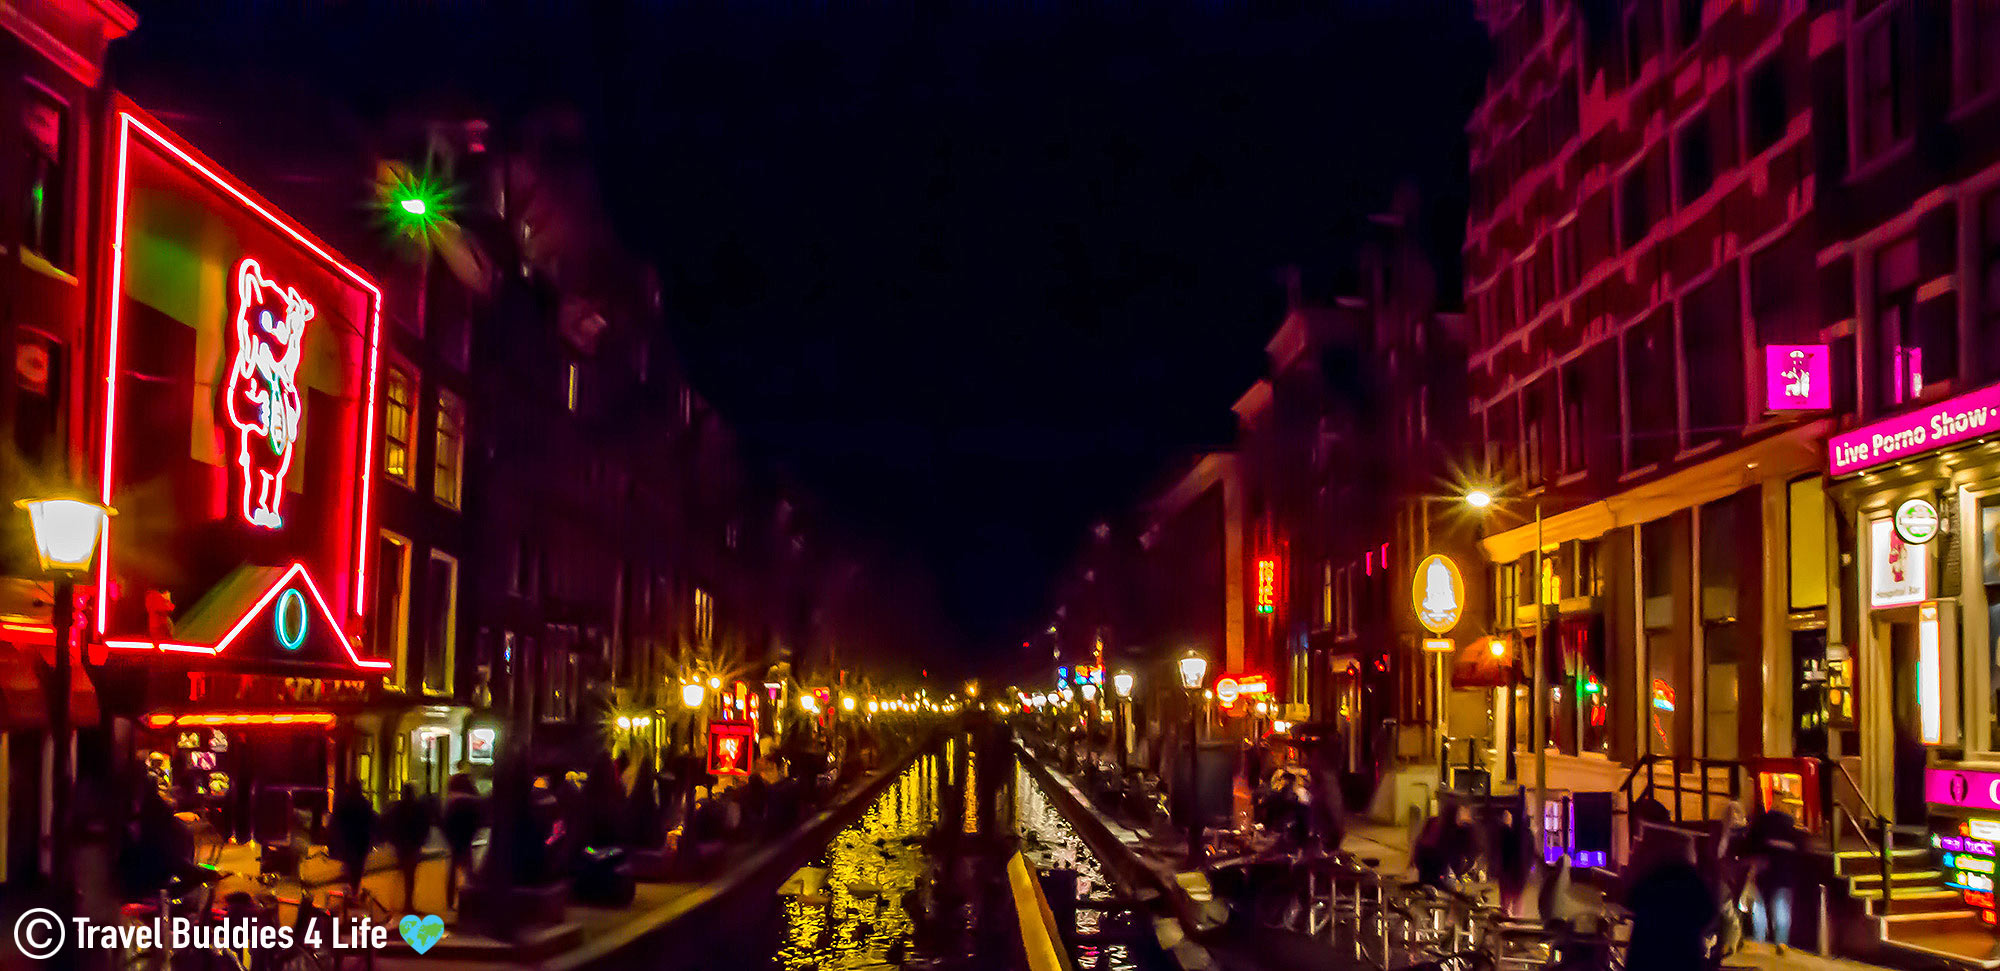 A Nighttime View Of The Canal In The Red Light District In The Netherlands, Europe